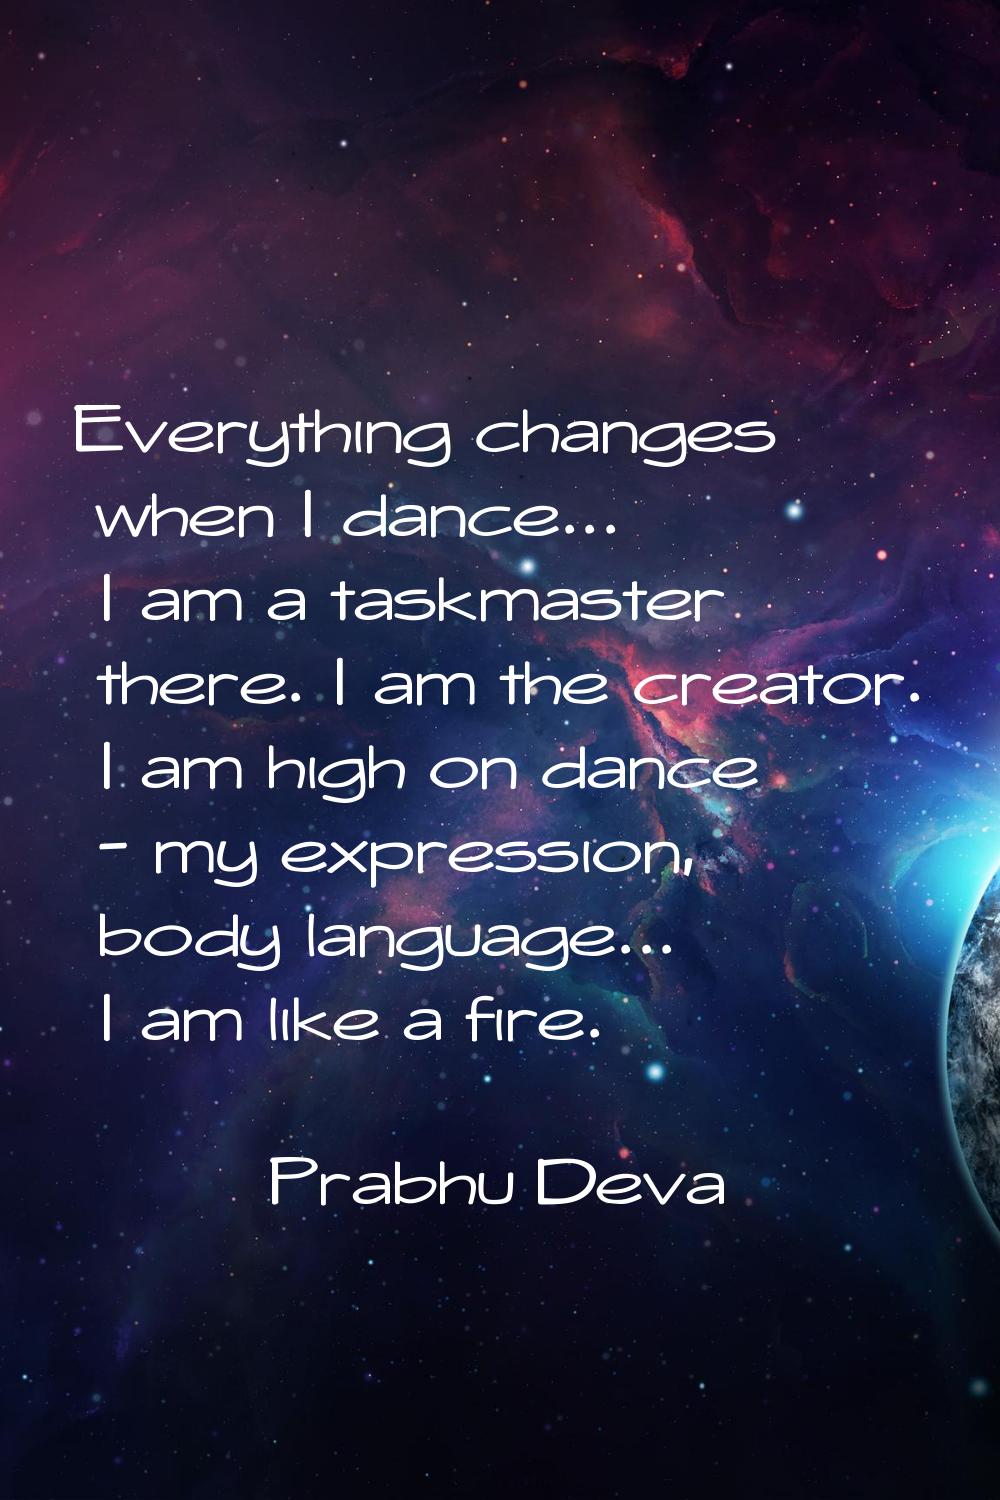 Everything changes when I dance... I am a taskmaster there. I am the creator. I am high on dance - 